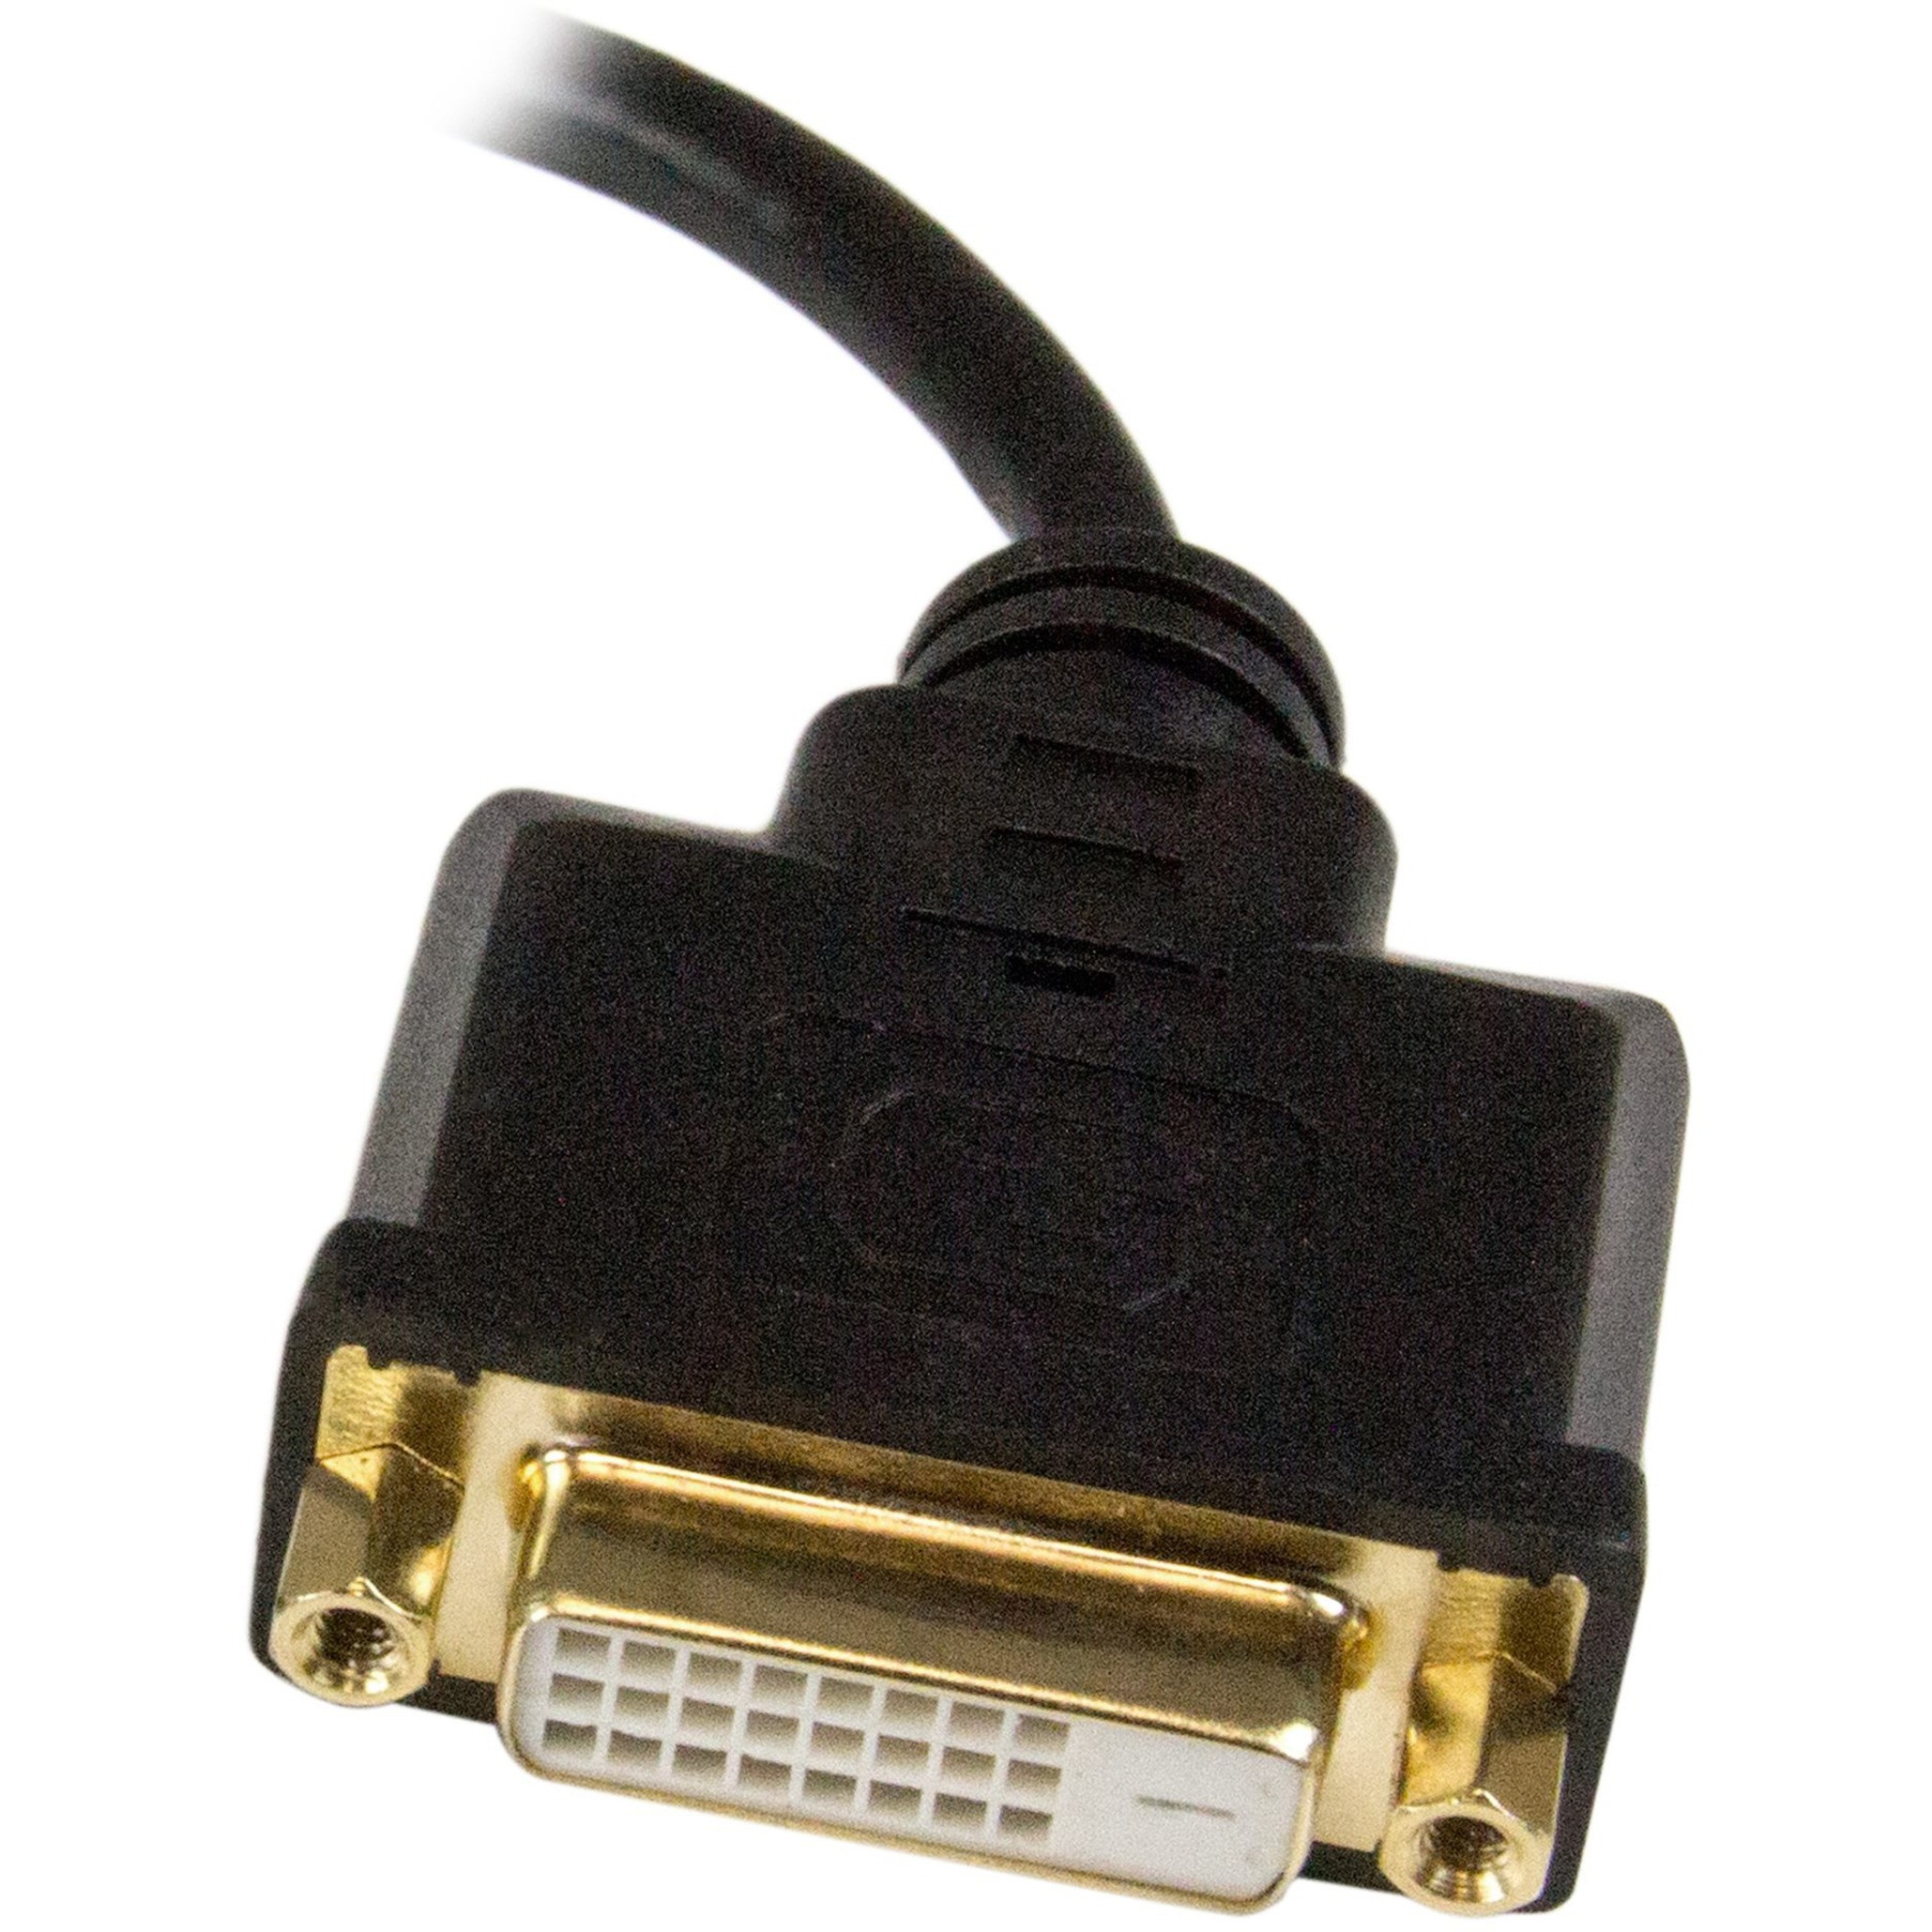 crack Slik Har det dårligt Startech .com Micro HDMI to DVI Adapter, Micro HDMI to DVI Converter, Micro  HDMI Type-D Device to DVI-D Monitor/Display, 8in (20cm) CableM...  HDDDVIMF8IN - Corporate Armor